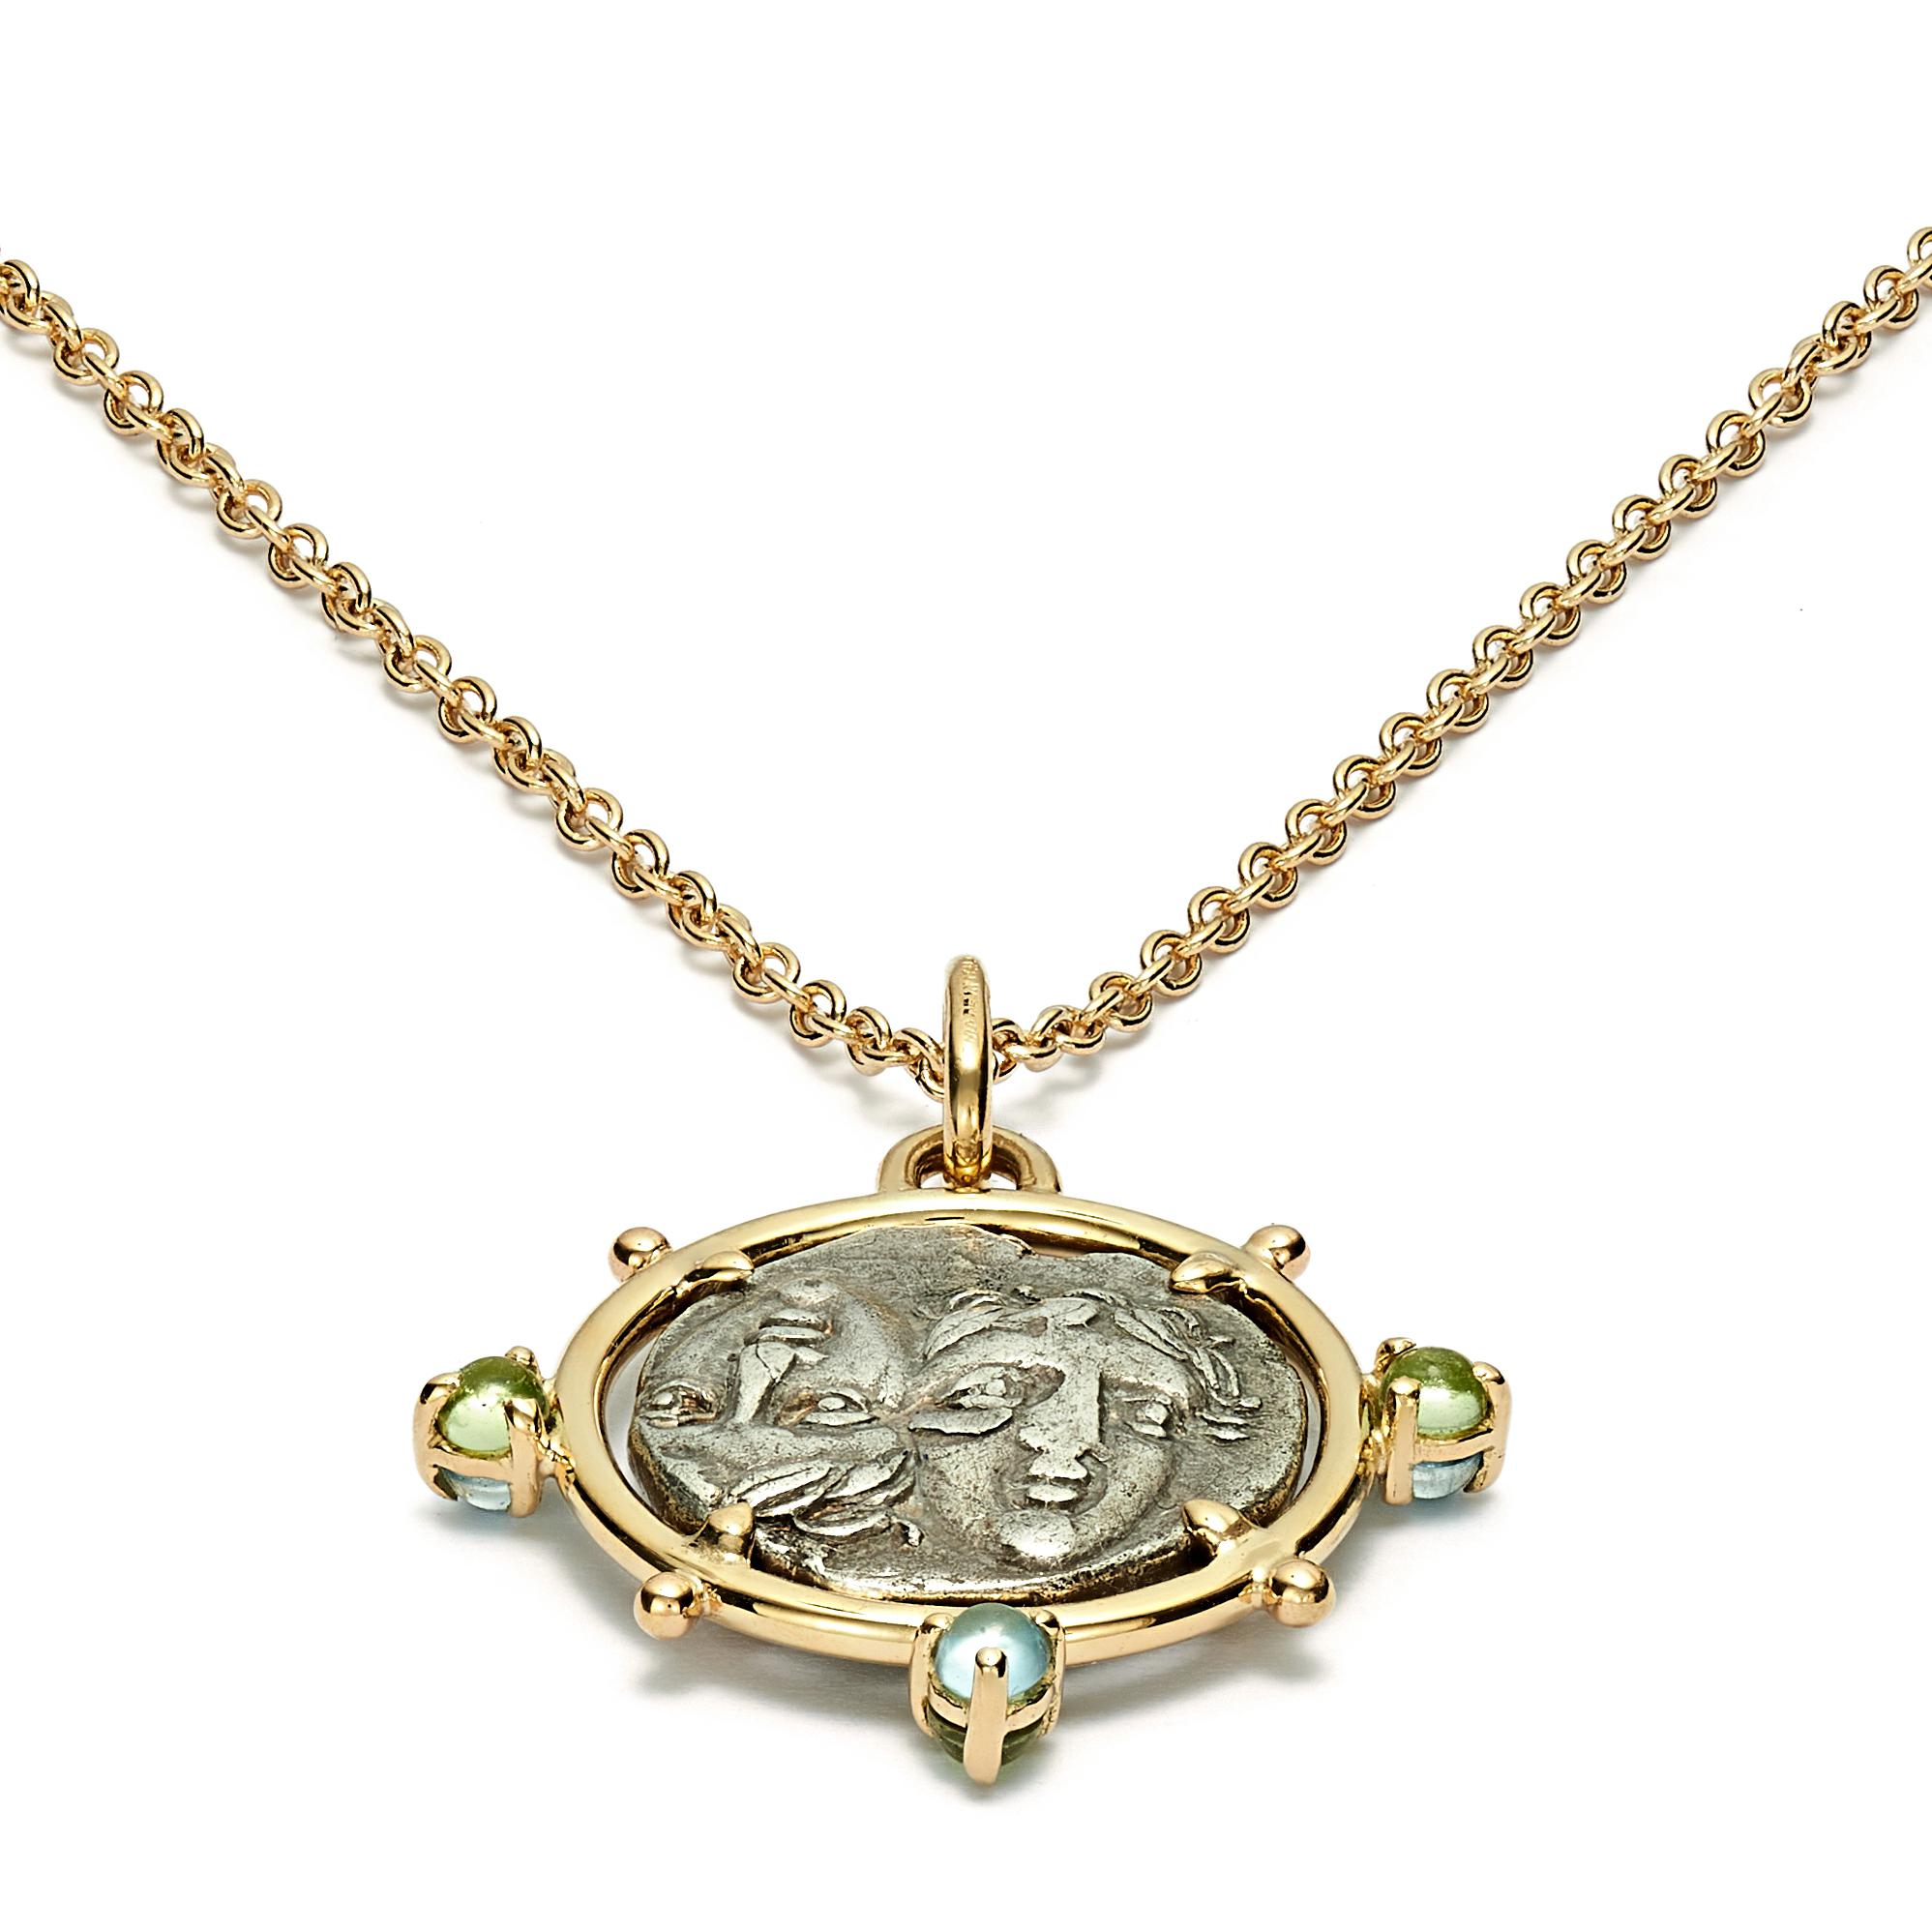 This DUBINI coin necklace from the 'Empires' collection features an authentic silver coin from Istros, Moesia dating circa 4th century B.C. set in 18kt yellow gold with peridot and aquamarine cabochons.

Depicted on the coin: 
Obverse - Two young